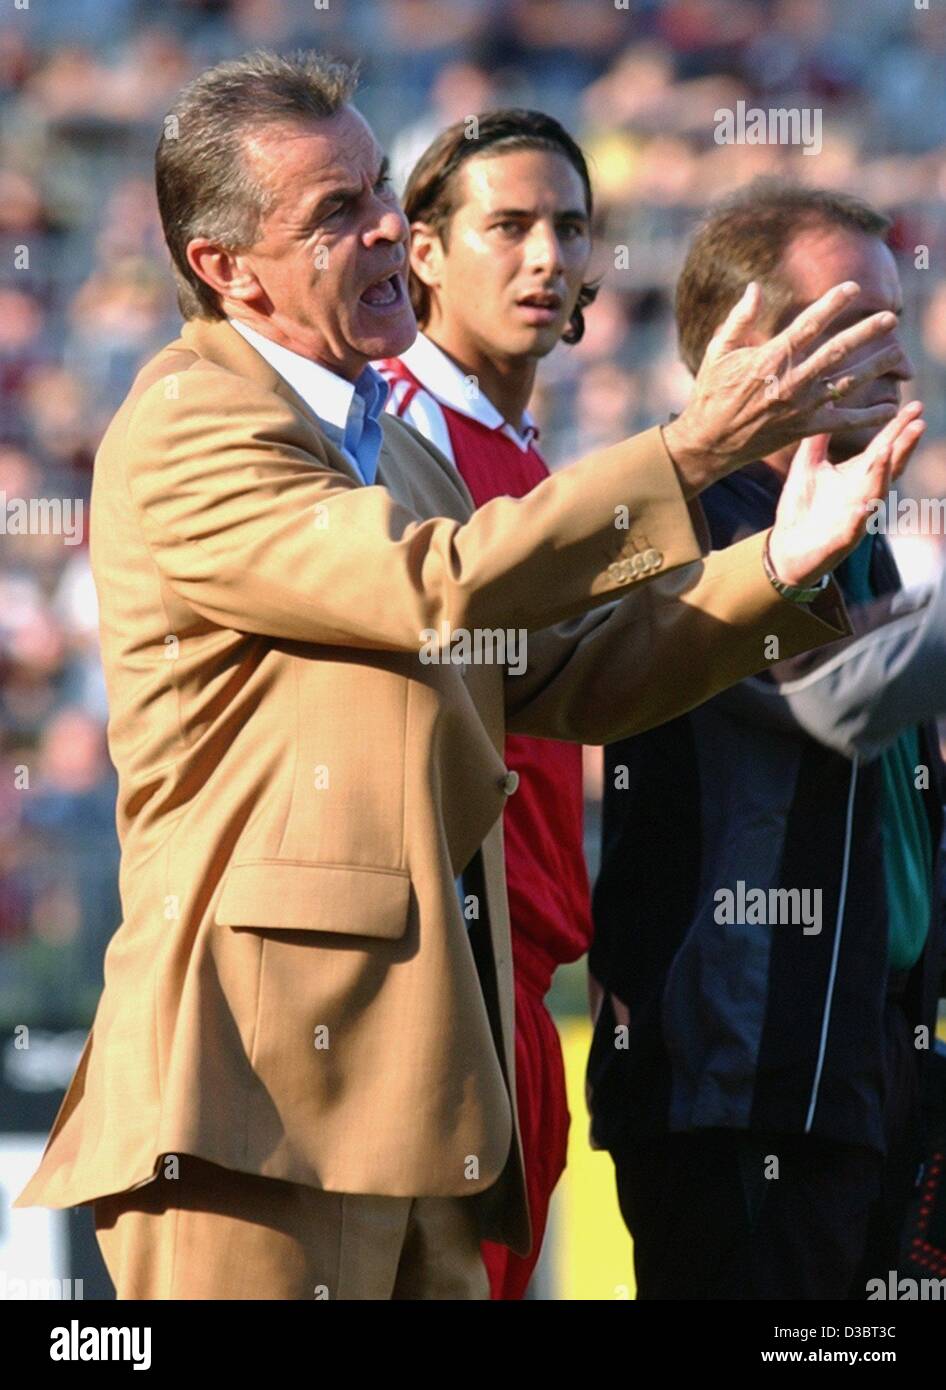 (dpa) - Bayern's soccer coach Ottmar Hitzfeld (front) gestures at the sideline of the Bundesliga game opposing FC Bayern Munich and Bayer 04 Leverkusen in Munich, 20 September 2003. In the background the Peruvian Bayern forward Claudio Pizarro. The game ended in a 3-3 draw. Leverkusen currently rank Stock Photo